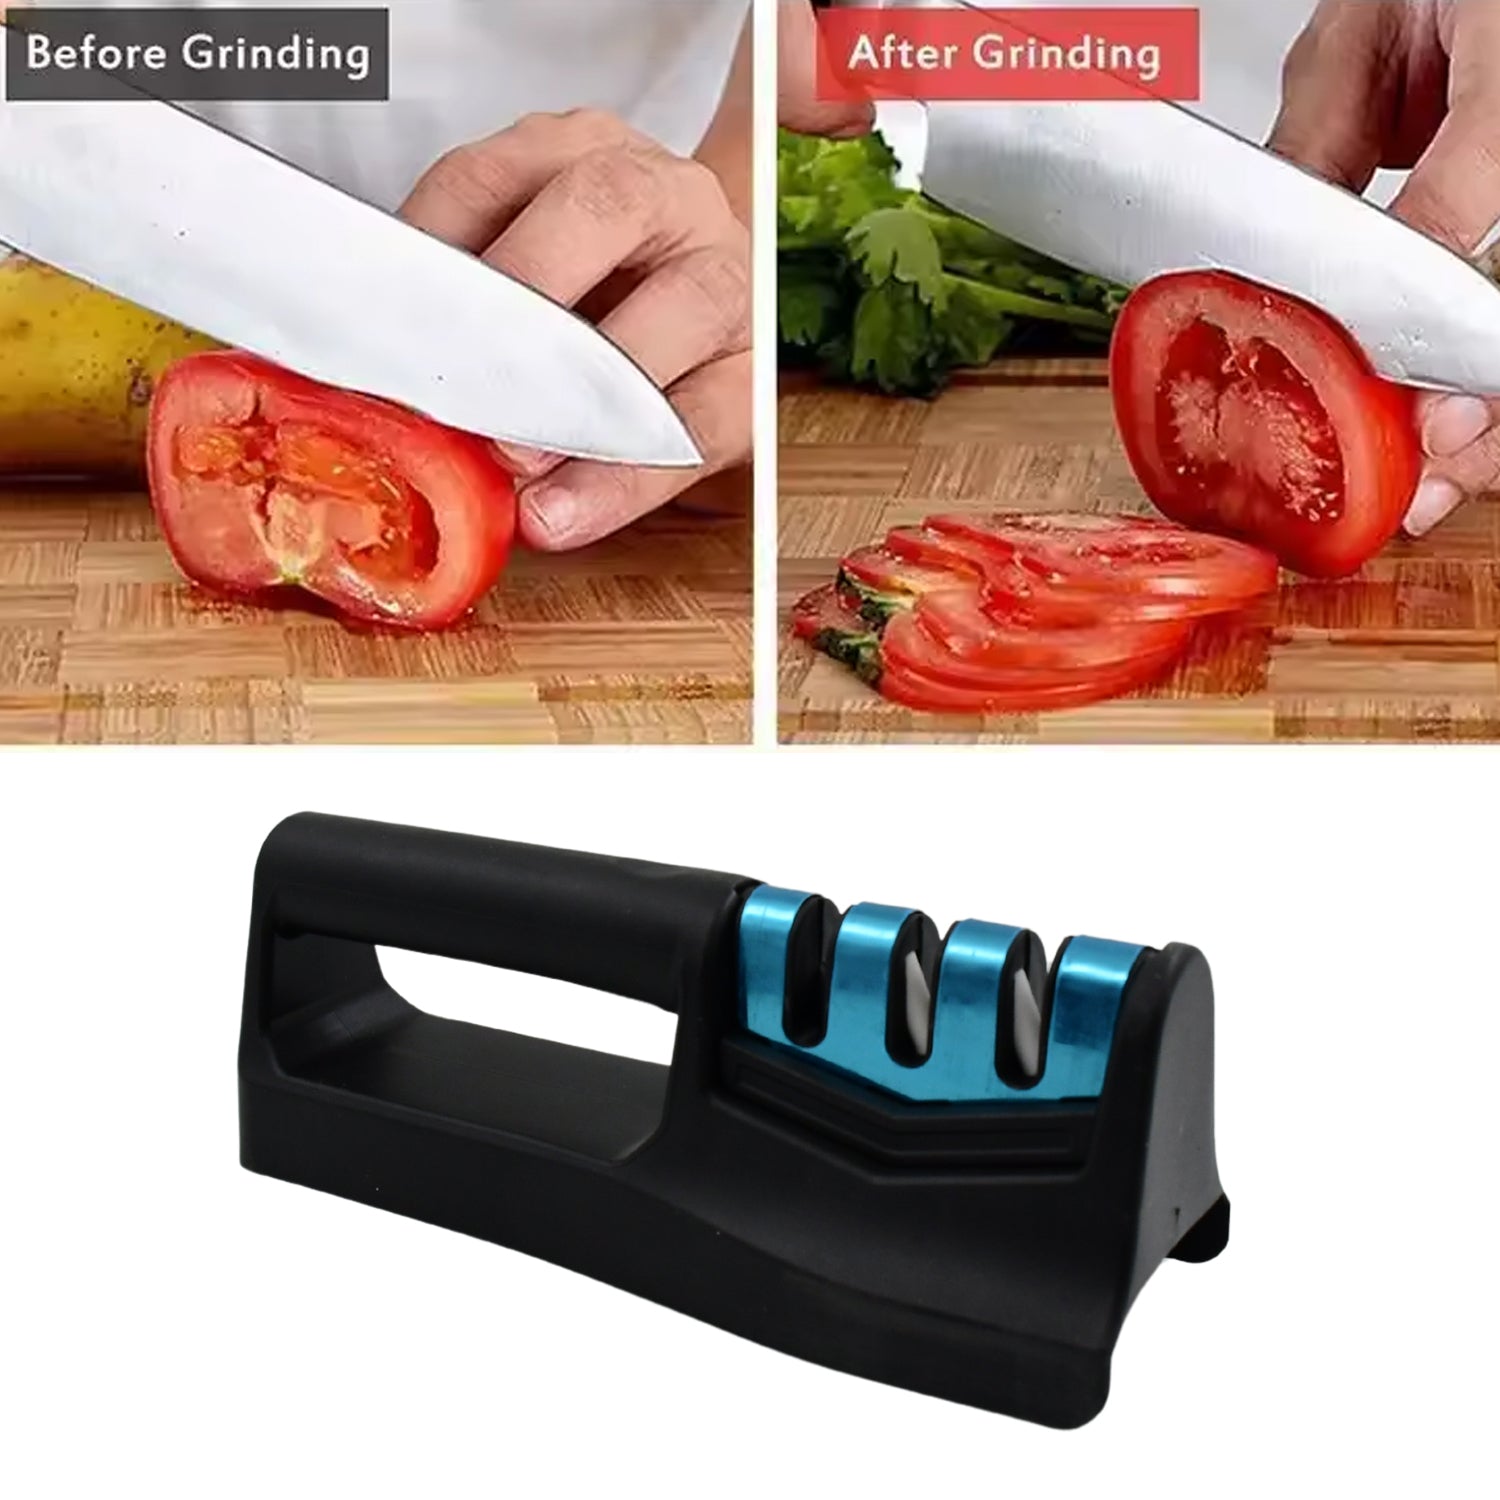 10020 Knife Sharpener for Kitchen | Knife Sharpener with Vegetable Chopper and Fish Scale Remover | Handheld Knives & Pocket Knife Sharpener | Knife Sharpener for Chefs & Serrated Knife (9in1)